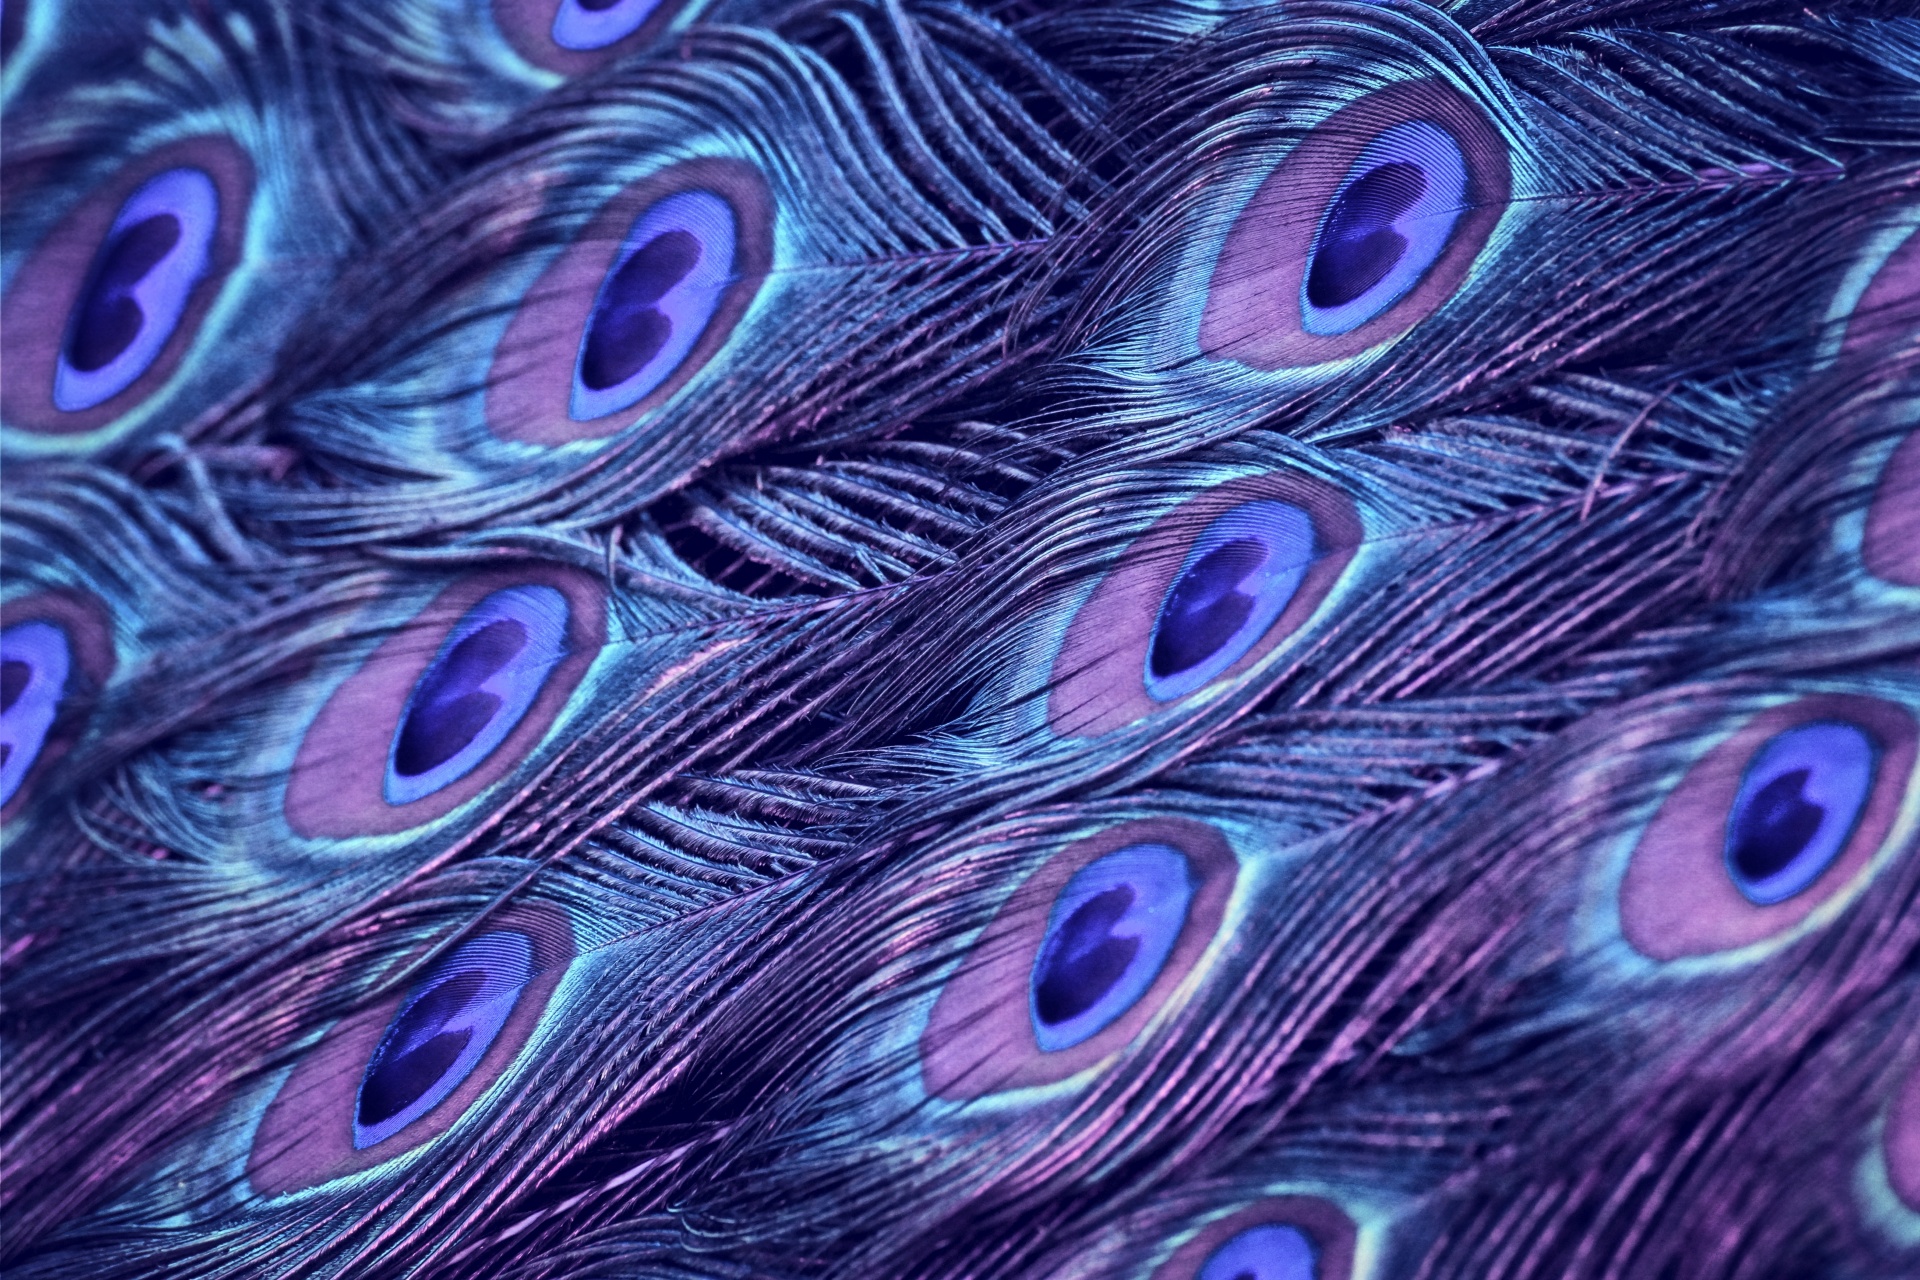 Peacock feathers bird plumage feather birds nature background colorful colors texture photo